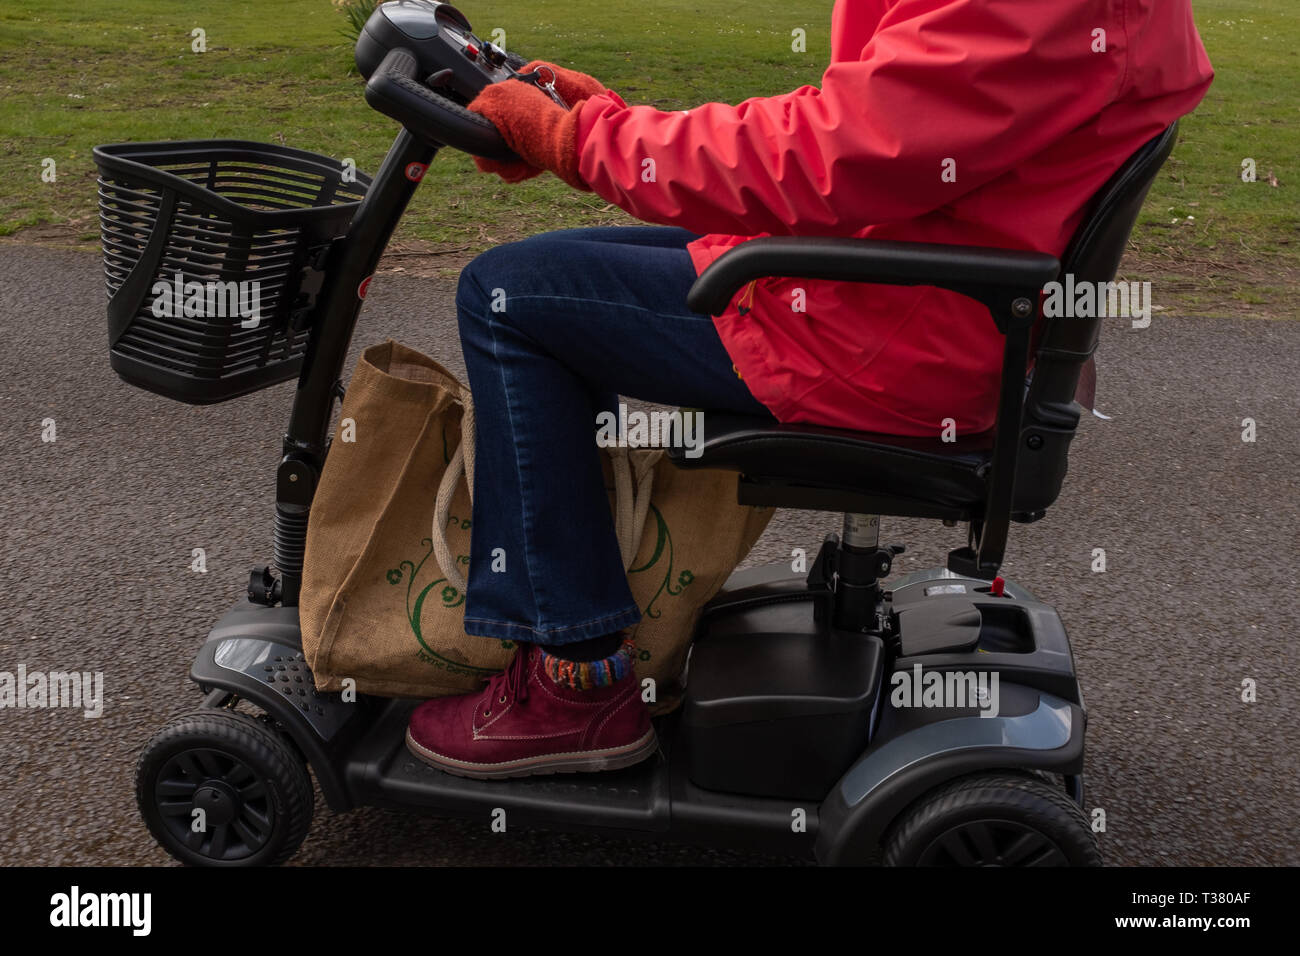 A side on shot of an elderly lady in a red coat enjoying the freedom of an electric mobility scooter, from the shoulders down Stock Photo